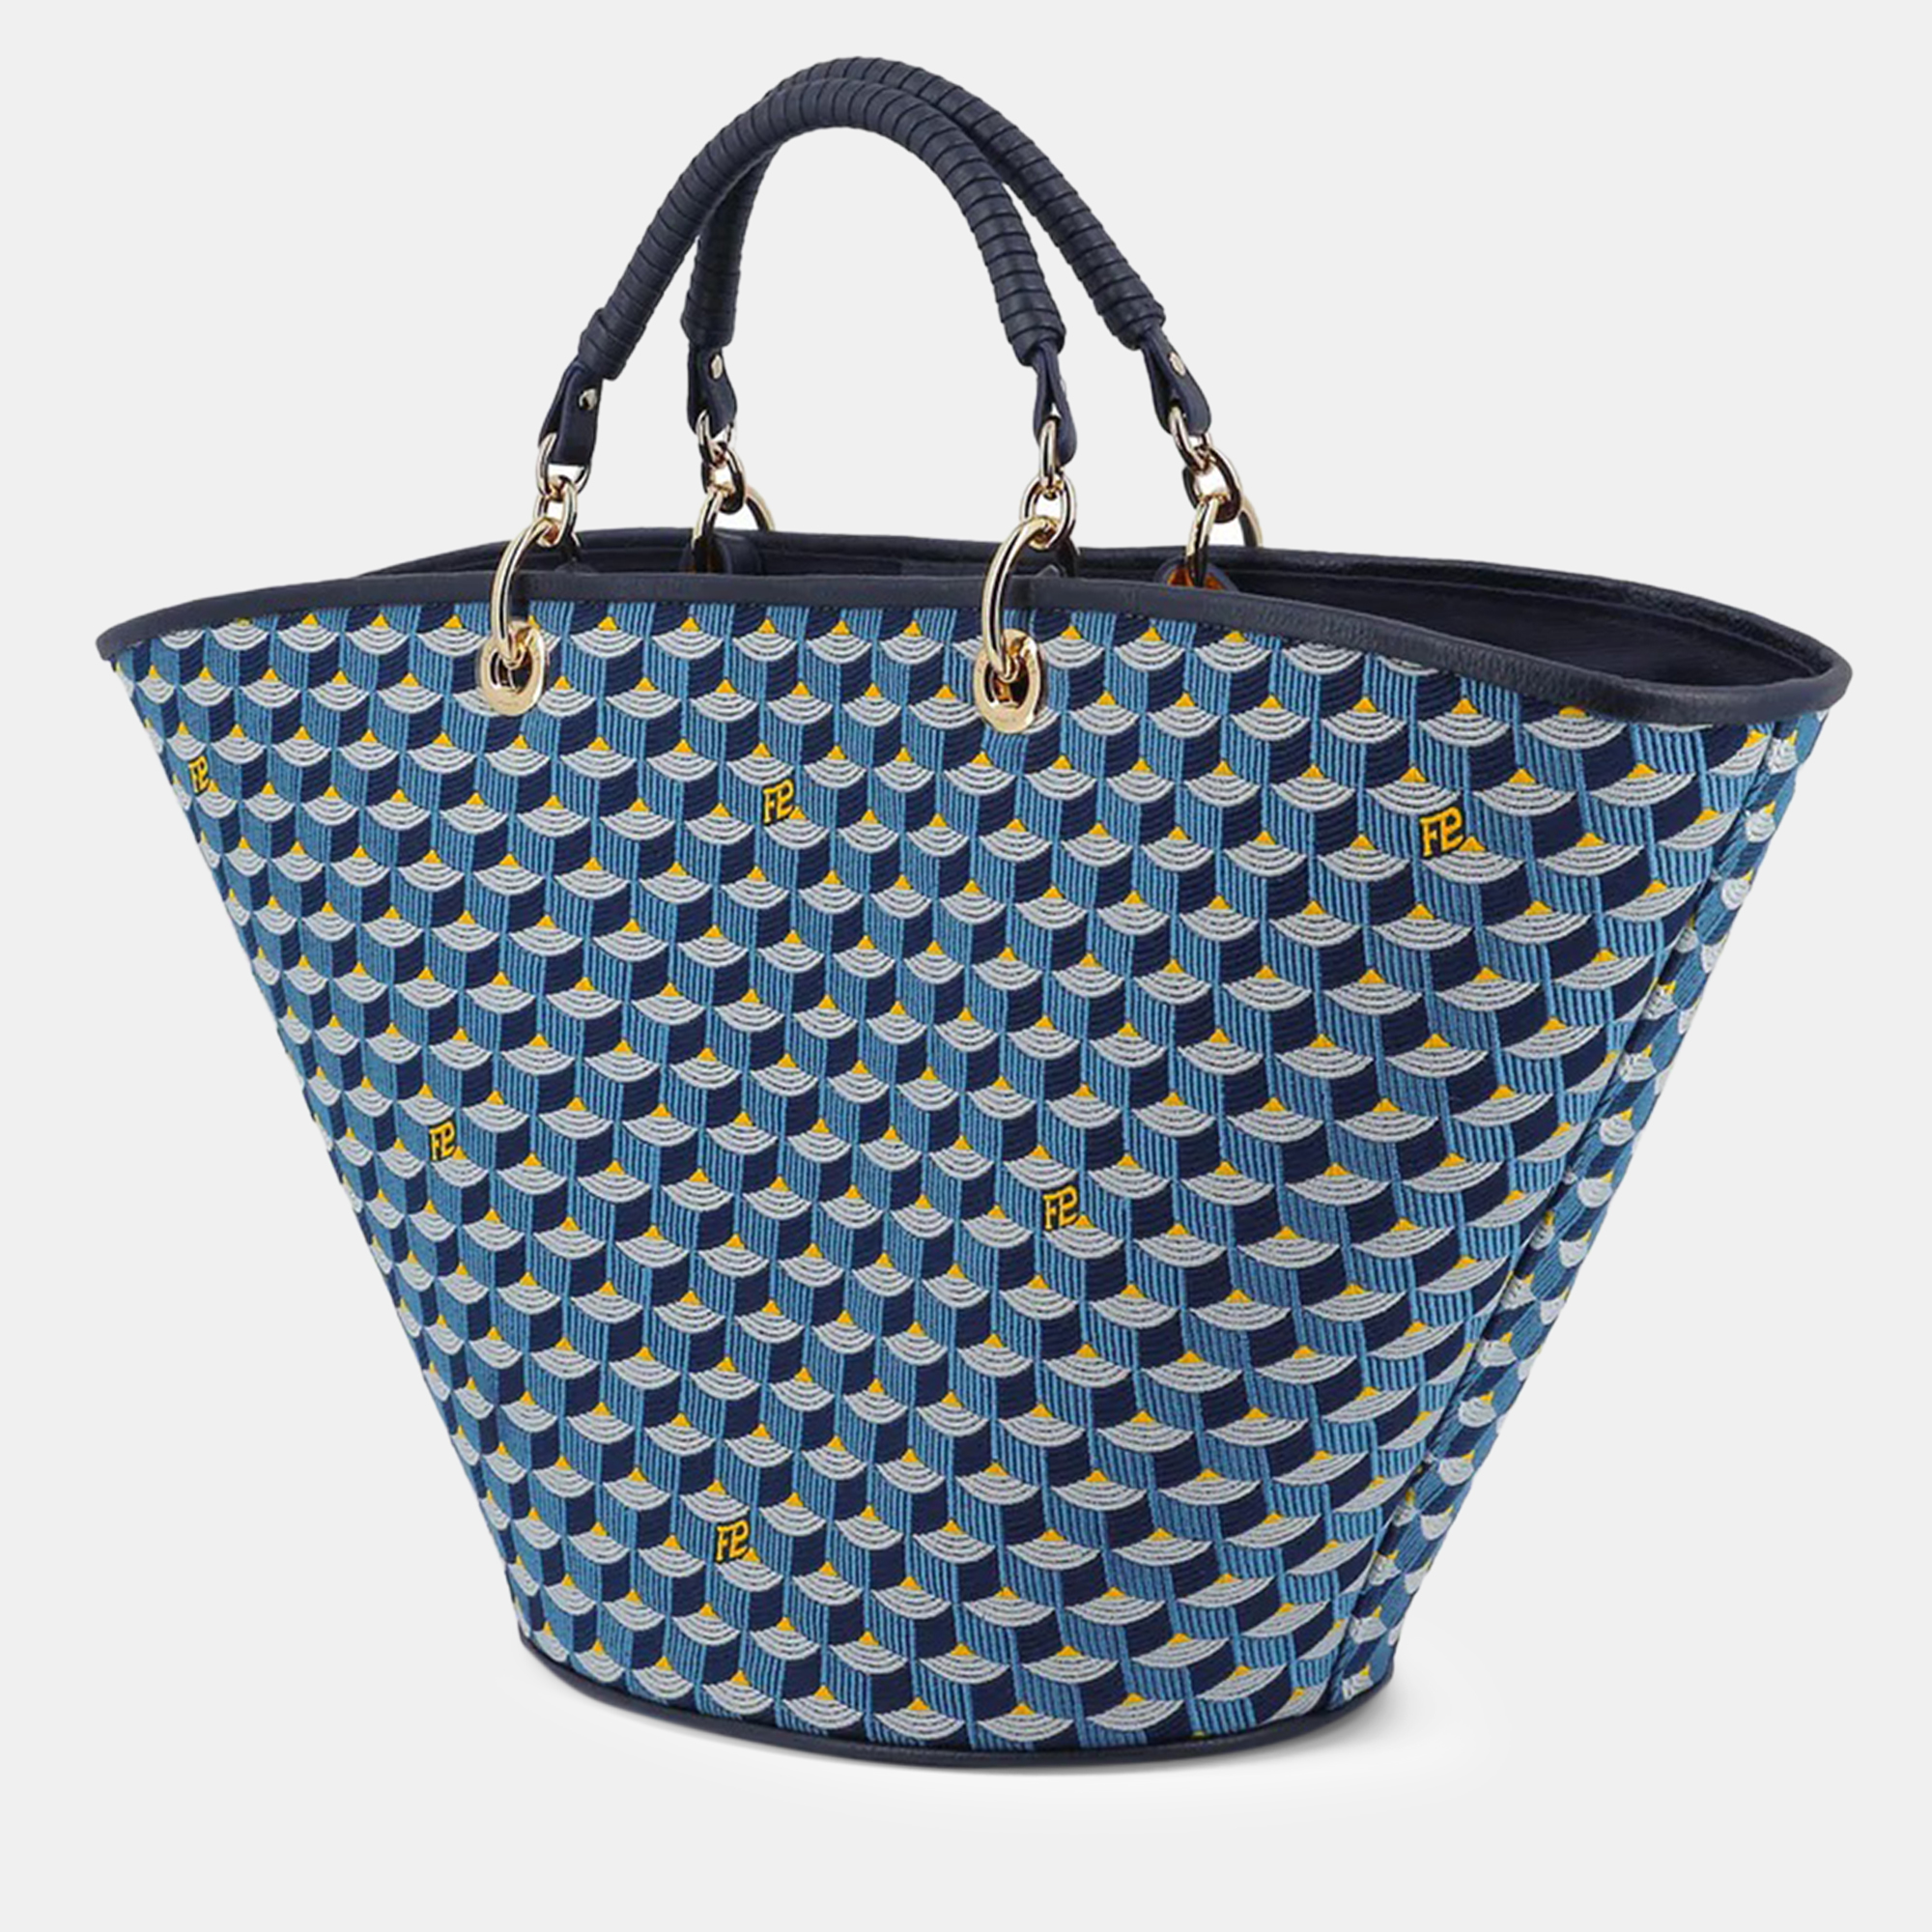 Faure Le Page Navy Blue Leather Tote